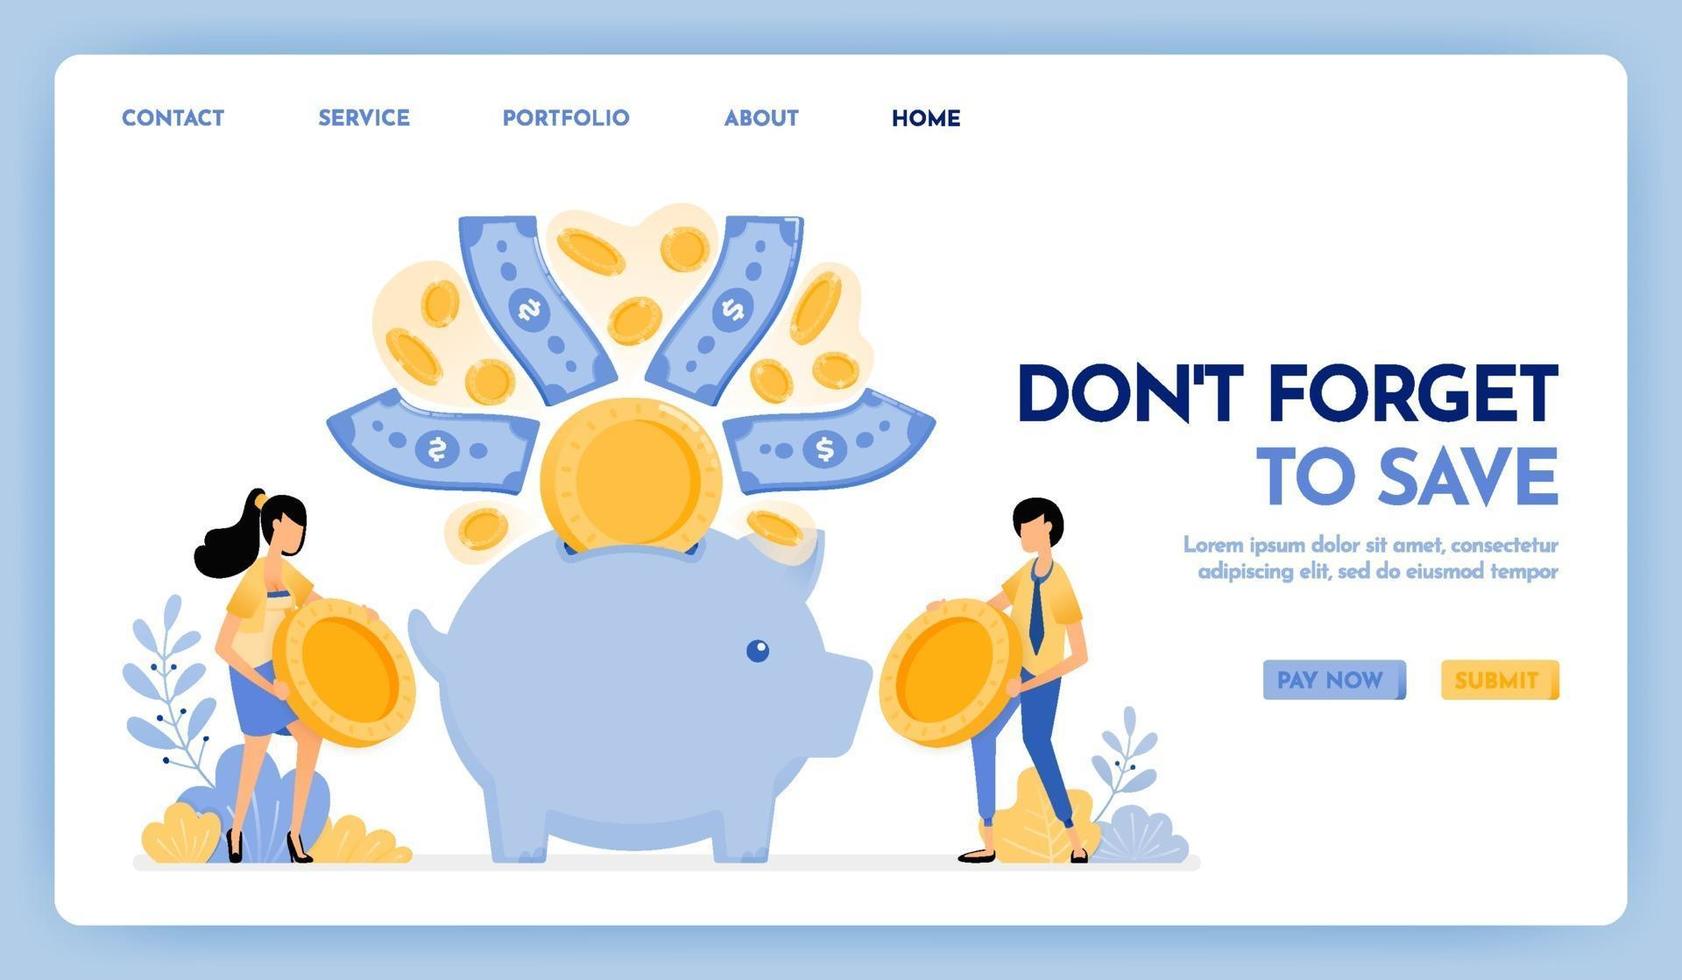 Illustration of don't forget to save. People hold coins to put in savings, financial and investment. Money flew into piggy bank. Design concept for banner, landing page, web, website, poster, ui ux vector